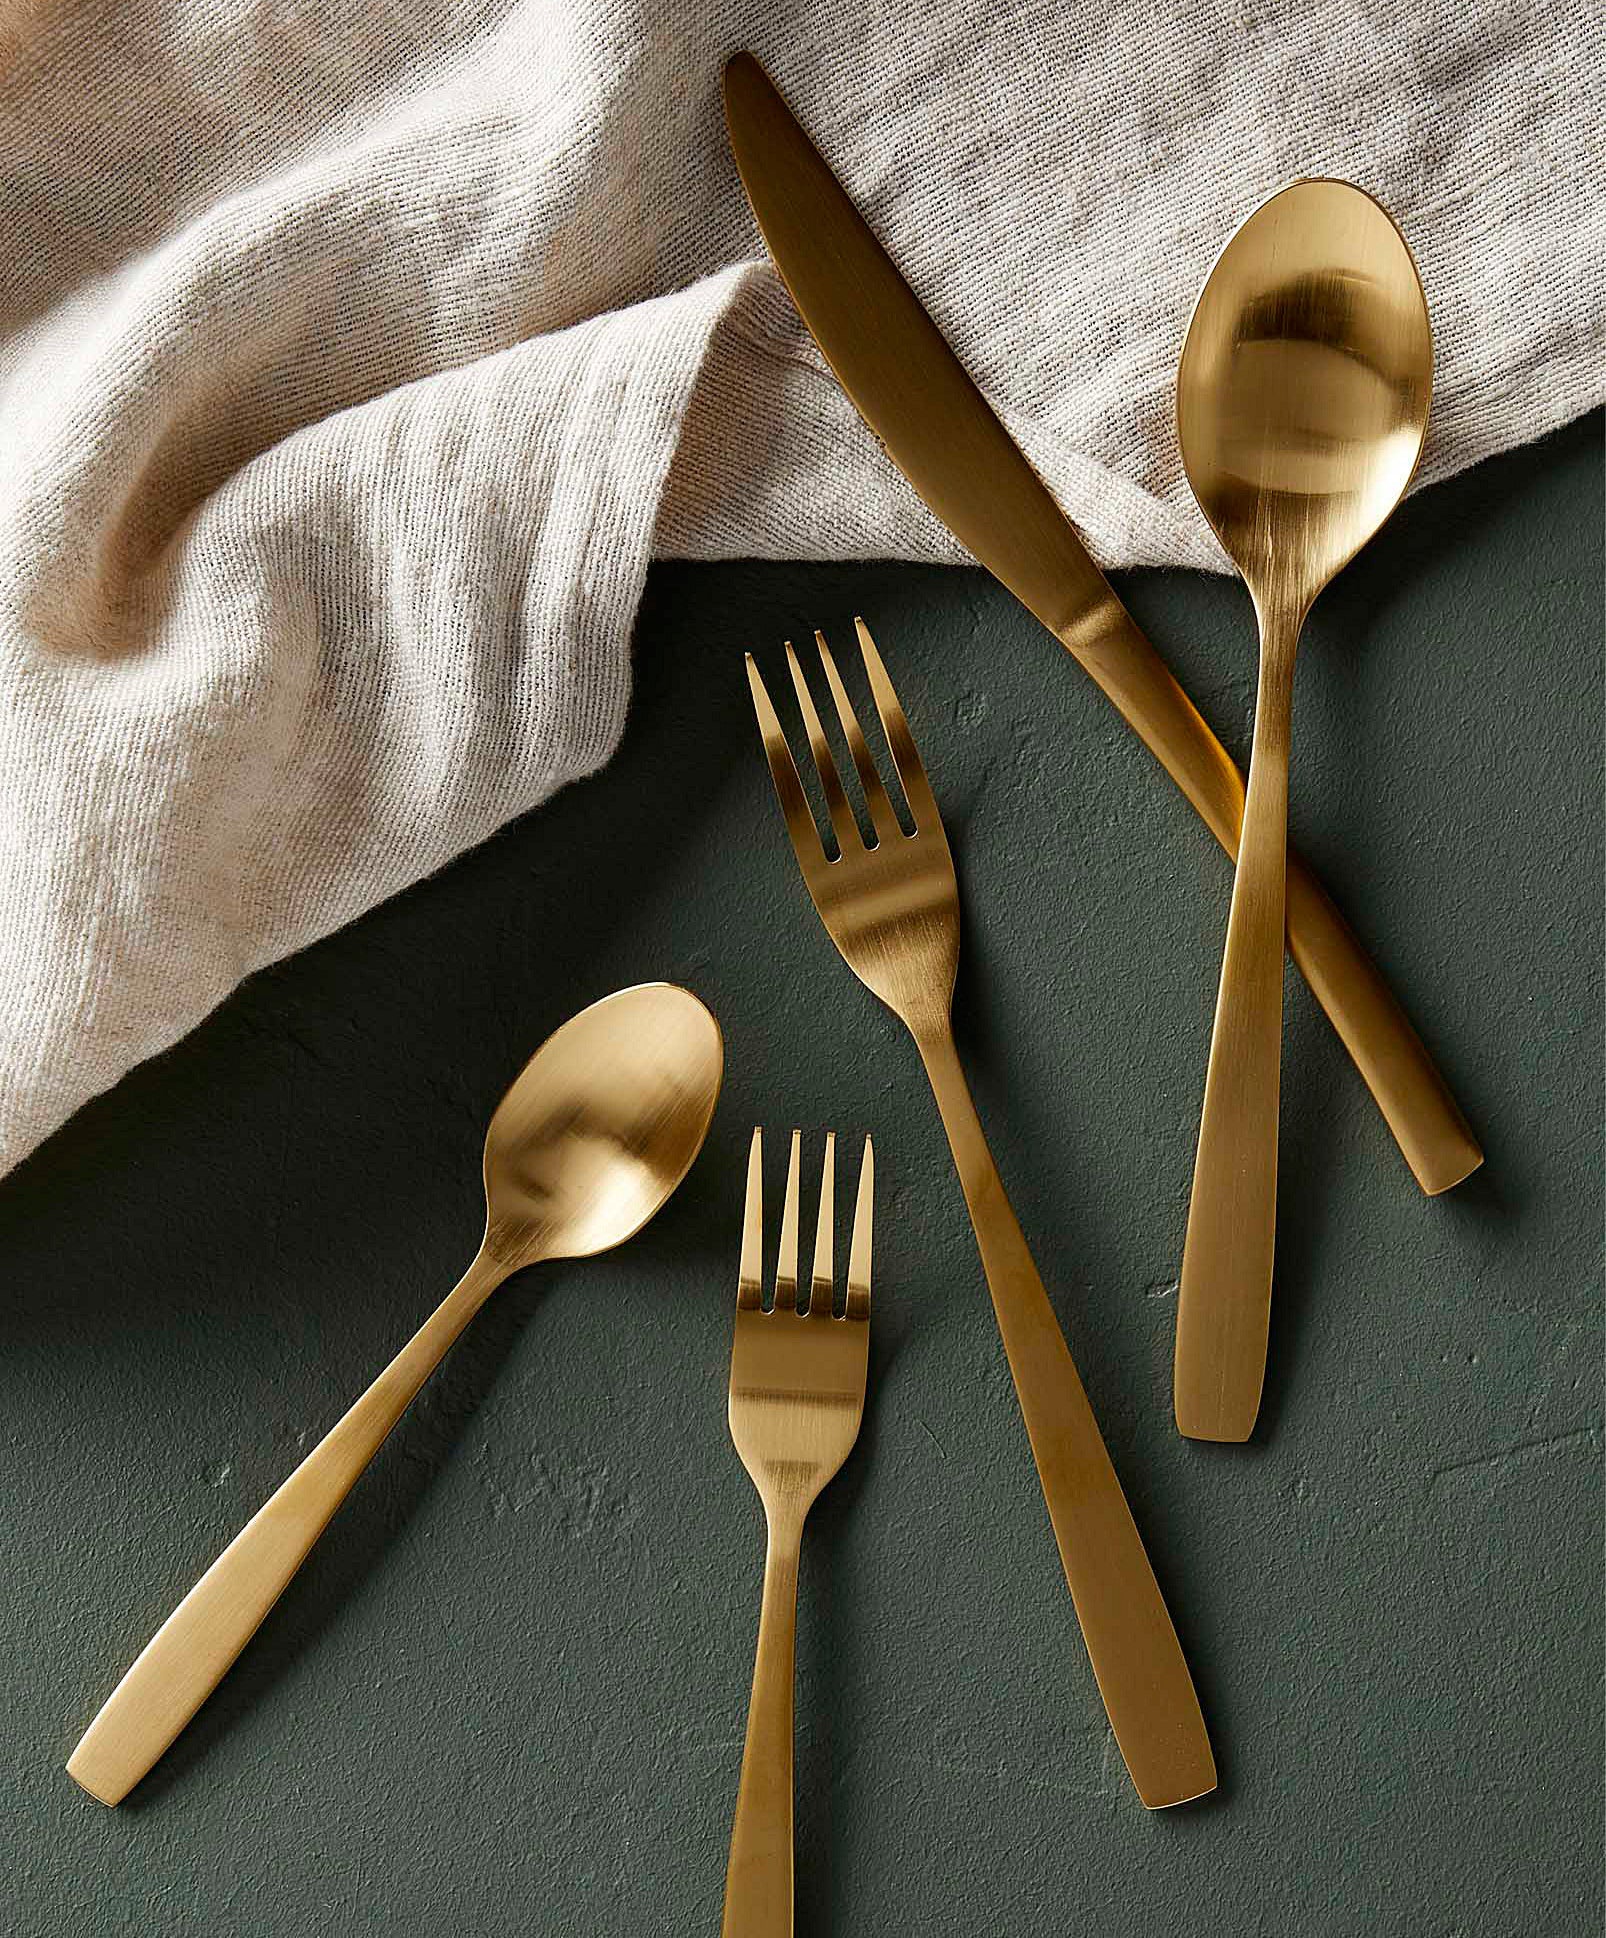 The utensils laid out on a table